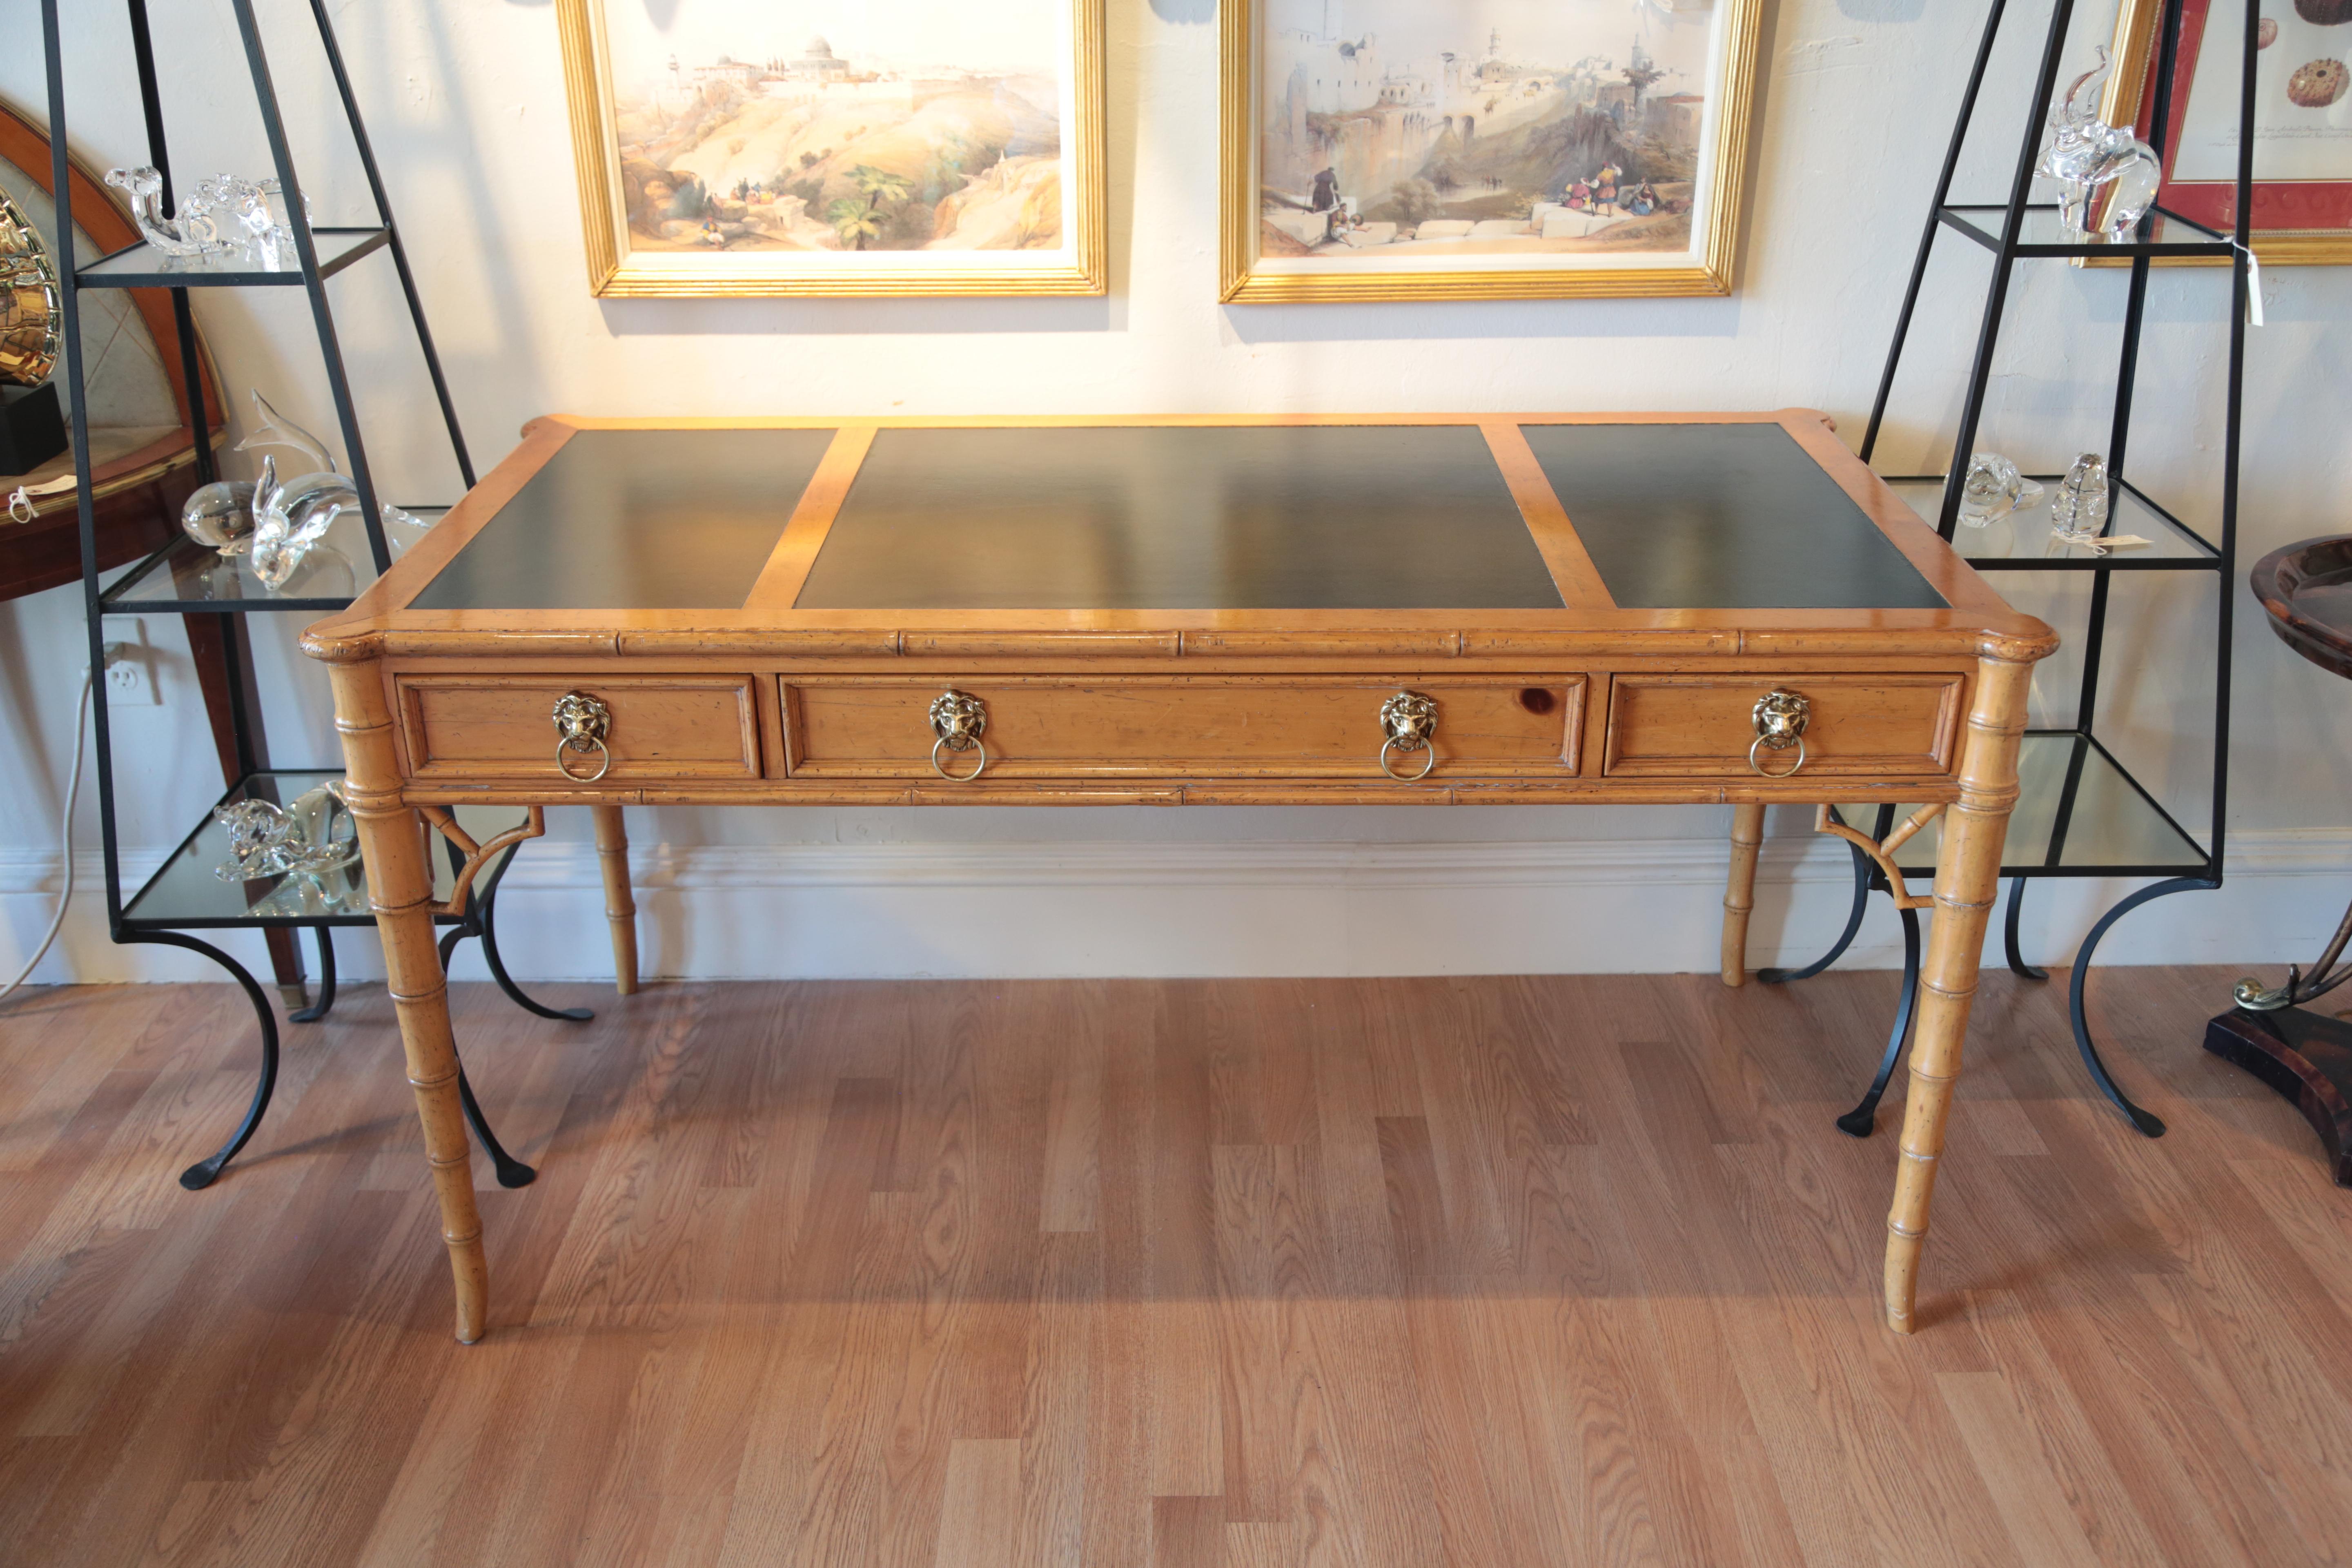 Chinese Chippendale style desk with dark green leather inserts on top by Baker Furniture Co. Lion's head ring pulls on drawers. Faux bamboo style legs.